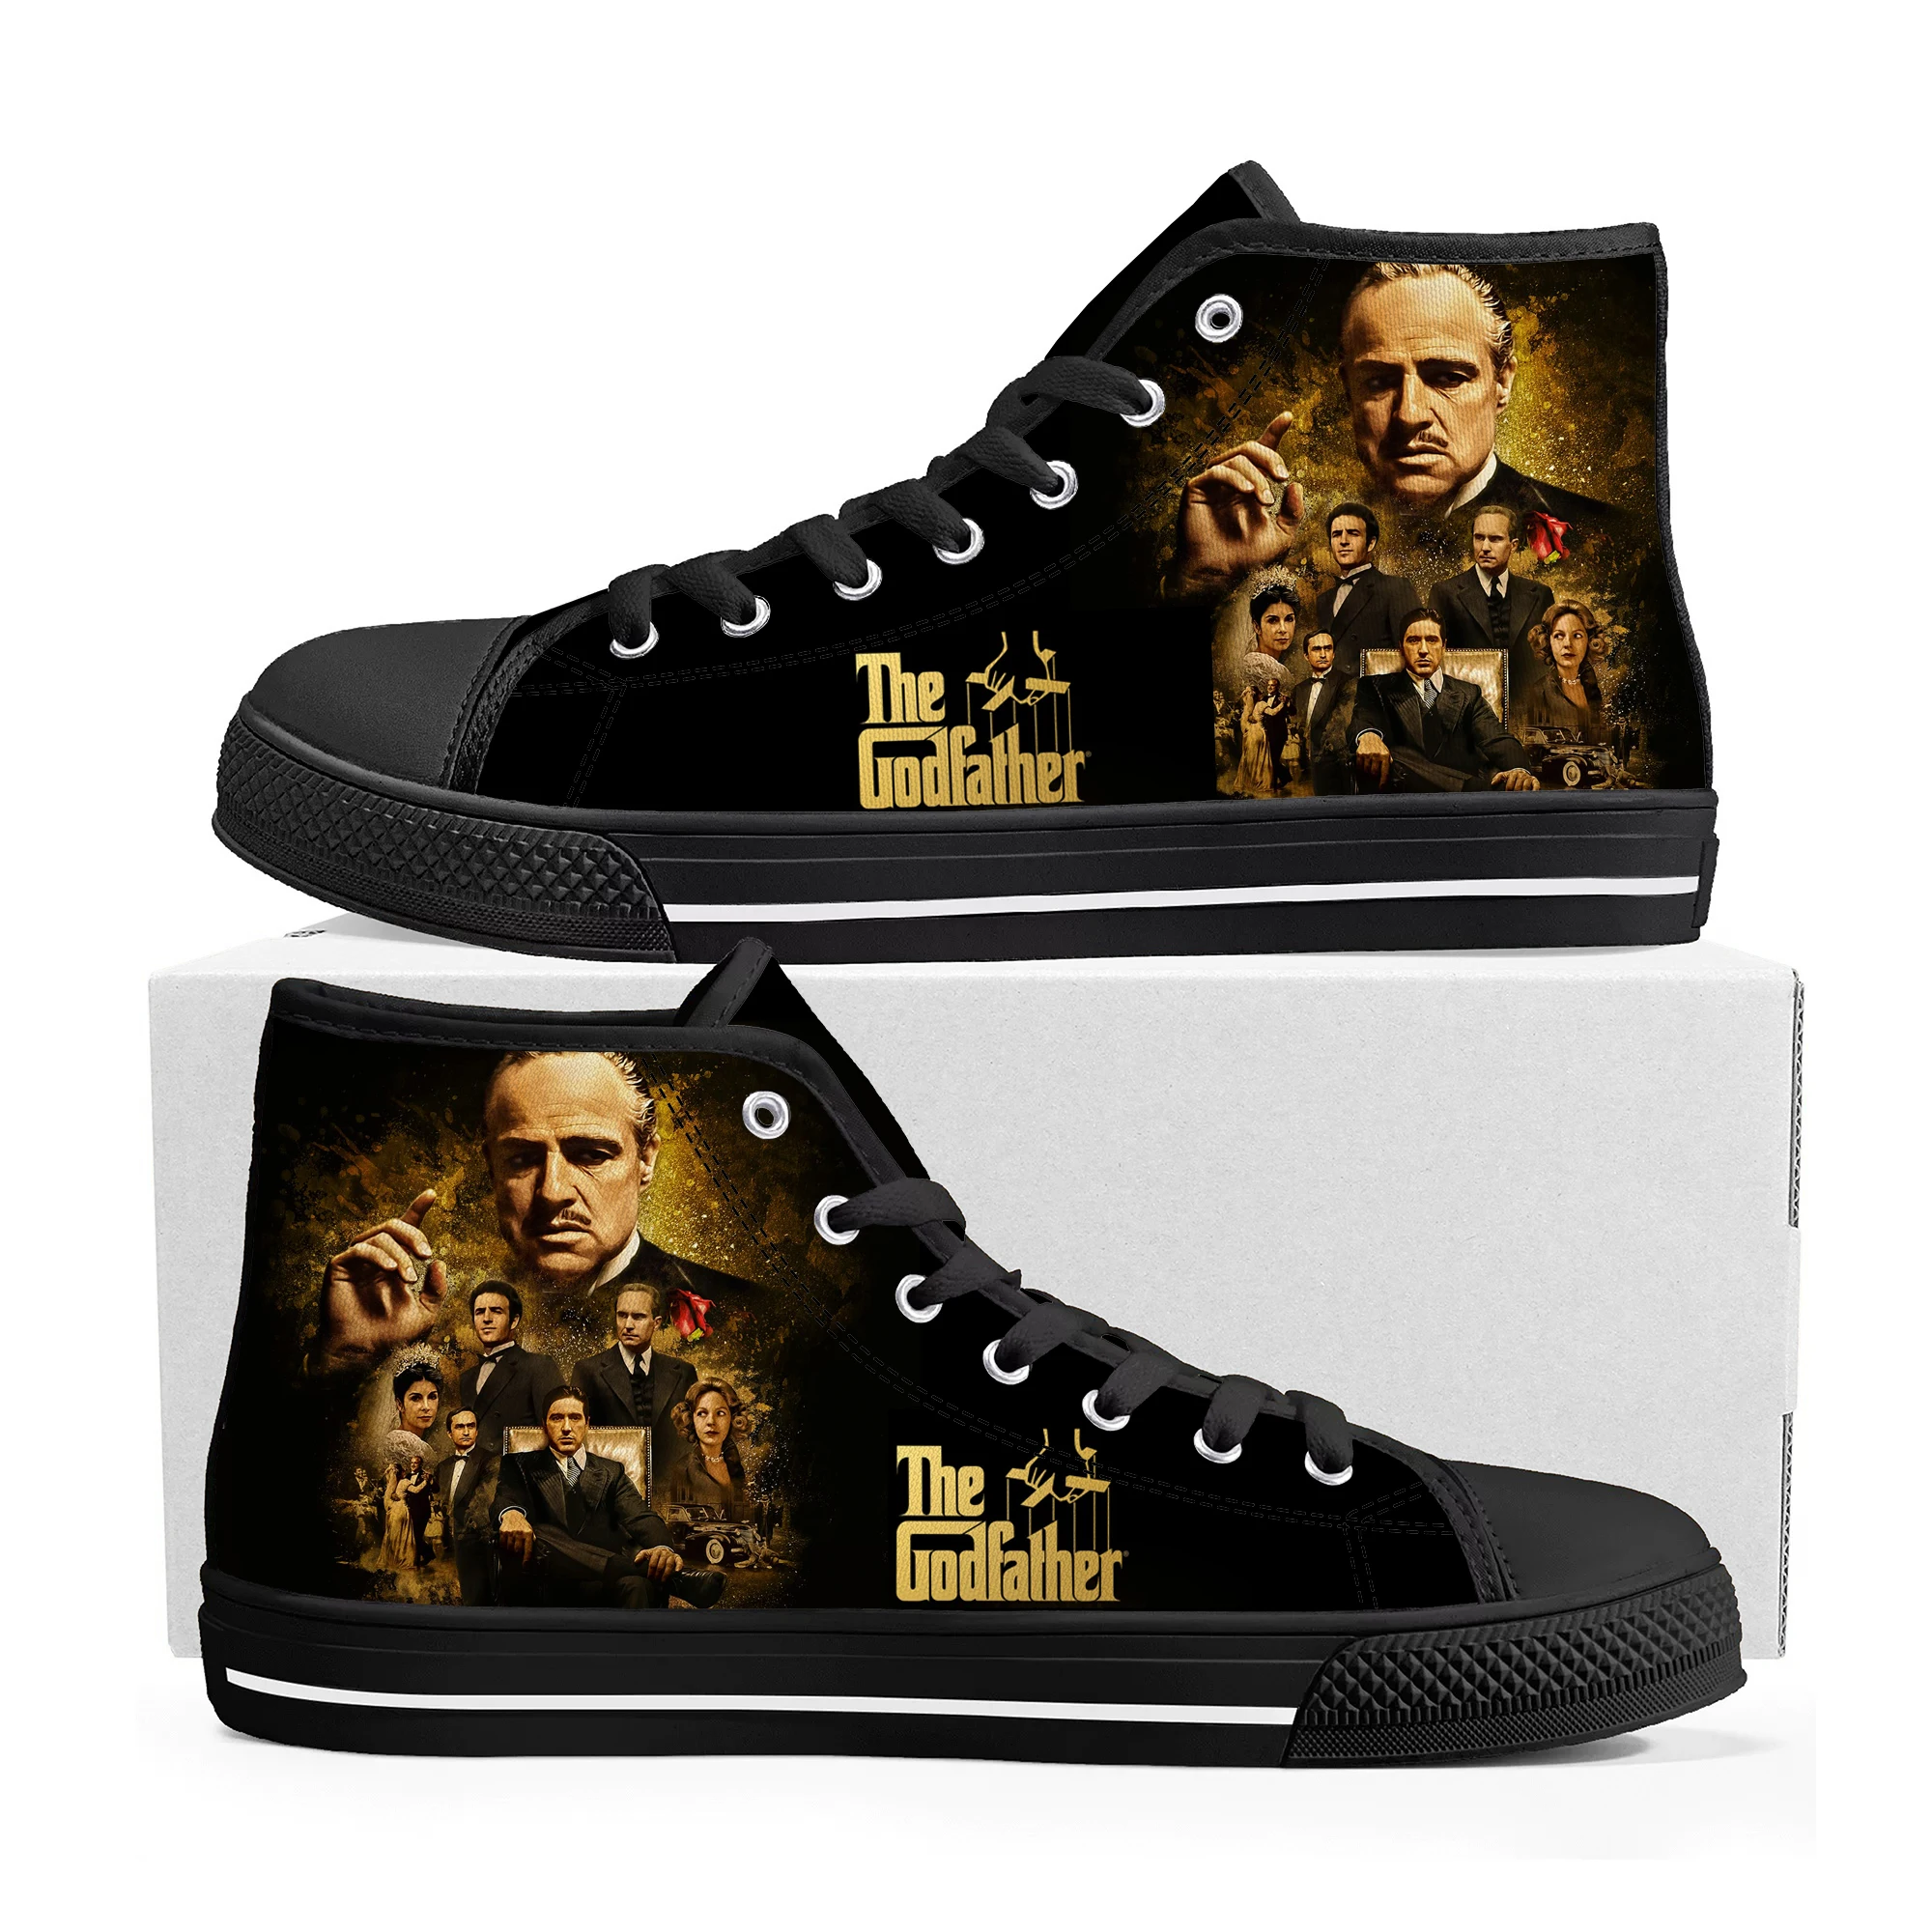 

The Godfather Hot Movie High Top Sneakers Mens Womens Teenager High Quality Canvas Sneaker Casual Couple Shoes Custom Shoe